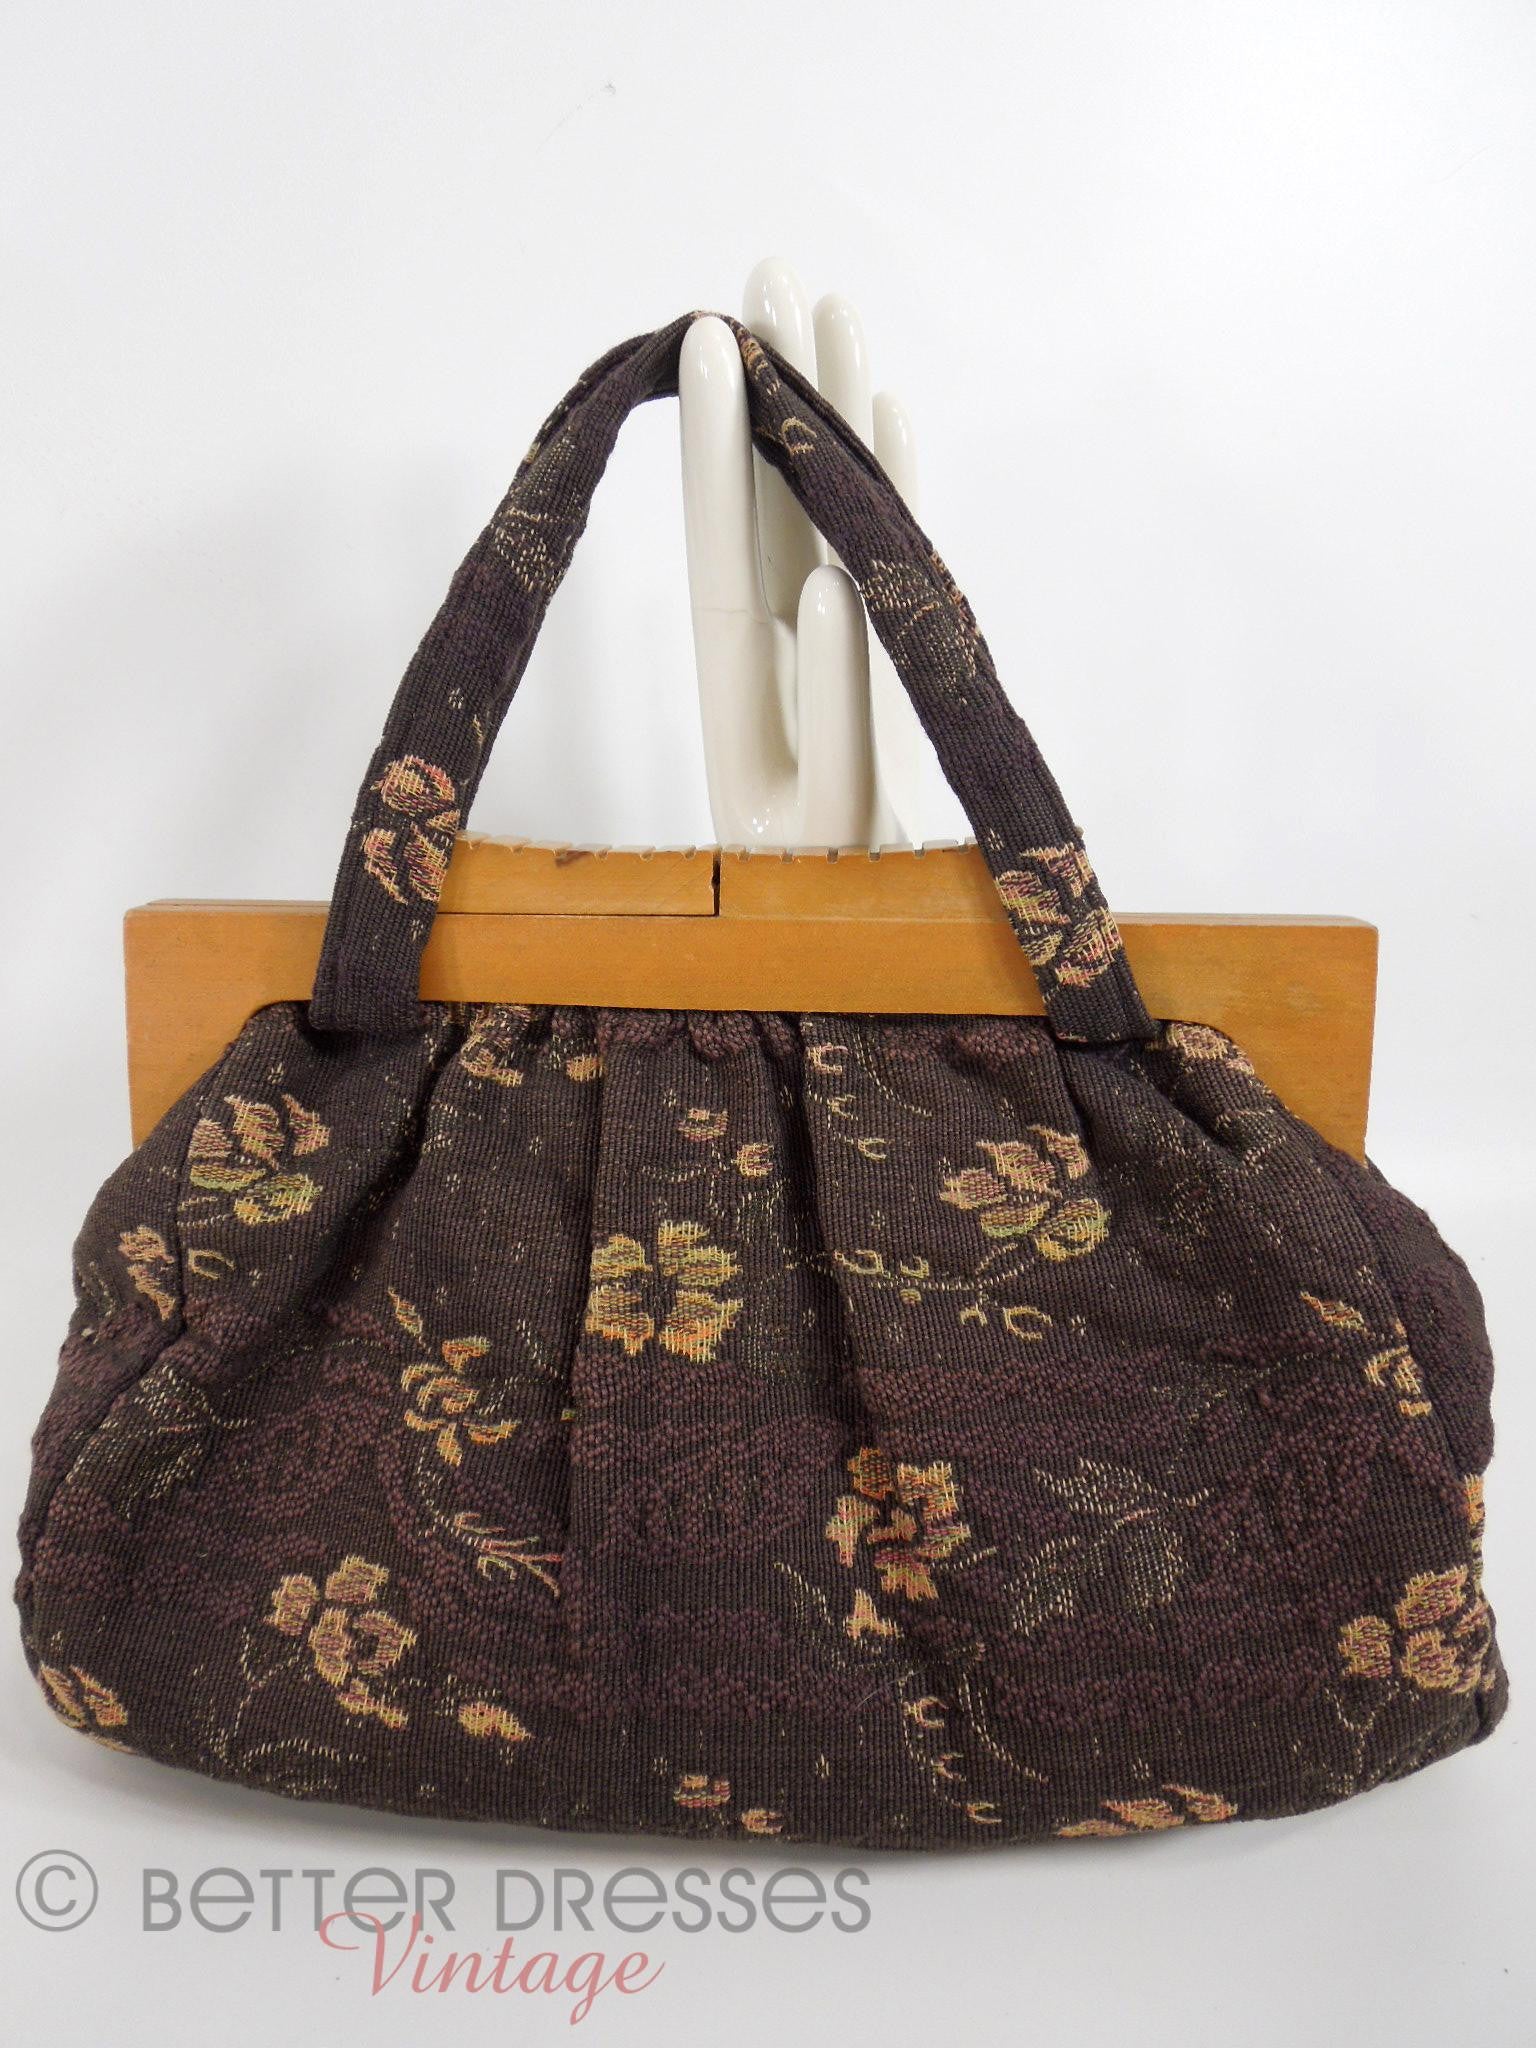 Buy Handmade Bags In Natural Fabrics: Over 60 Easy-To-Make Purses, Totes  and More Book Online at Low Prices in India | Handmade Bags In Natural  Fabrics: Over 60 Easy-To-Make Purses, Totes and